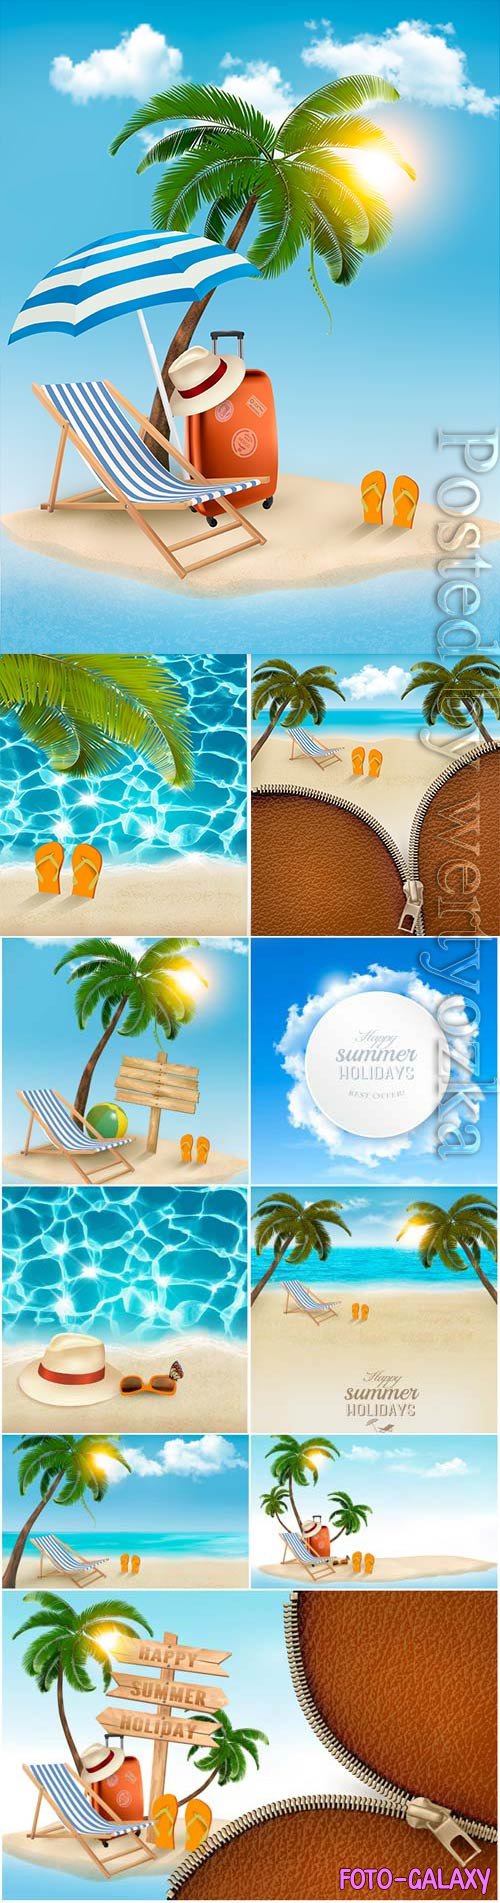 Summer backgrounds, sea palms and sand in vector